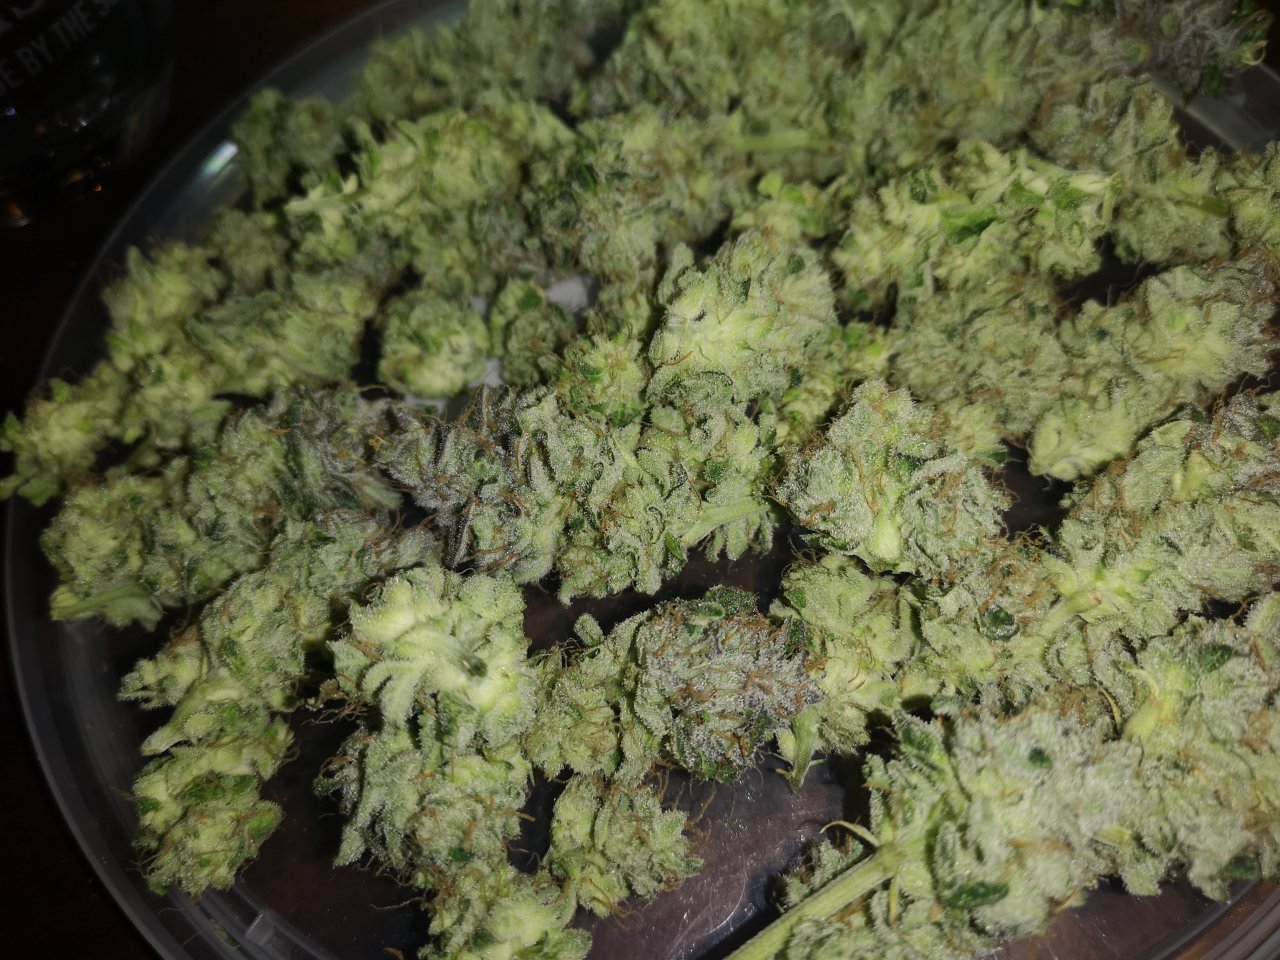 Blue Cheese - trimming